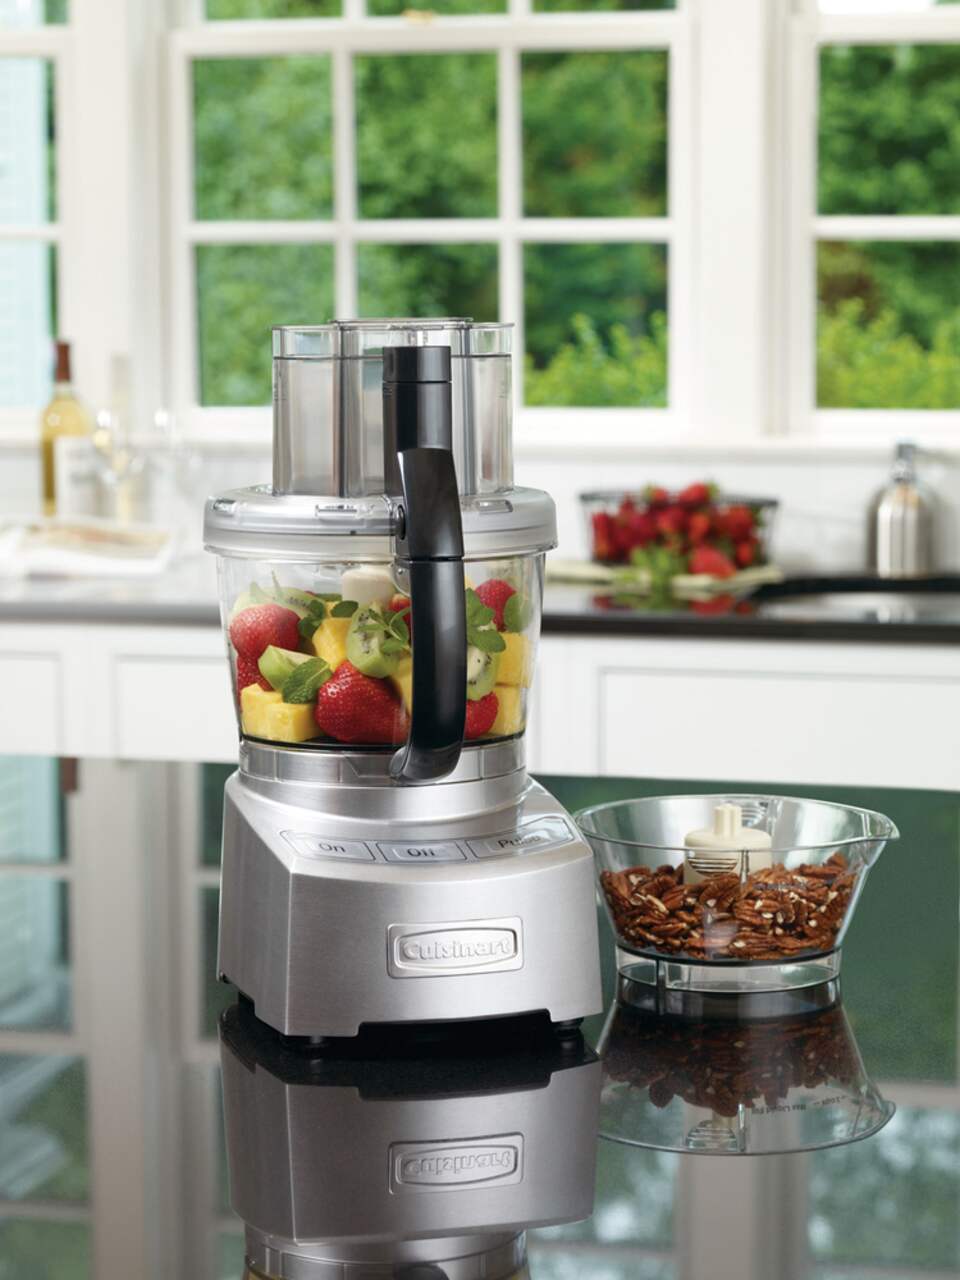 https://media-www.canadiantire.ca/product/living/kitchen/kitchen-appliances/0432174/cuisinart-elite-12-cup-food-processor-a5c09d1a-2b83-4639-bedb-5a581458a619.png?imdensity=1&imwidth=1244&impolicy=mZoom